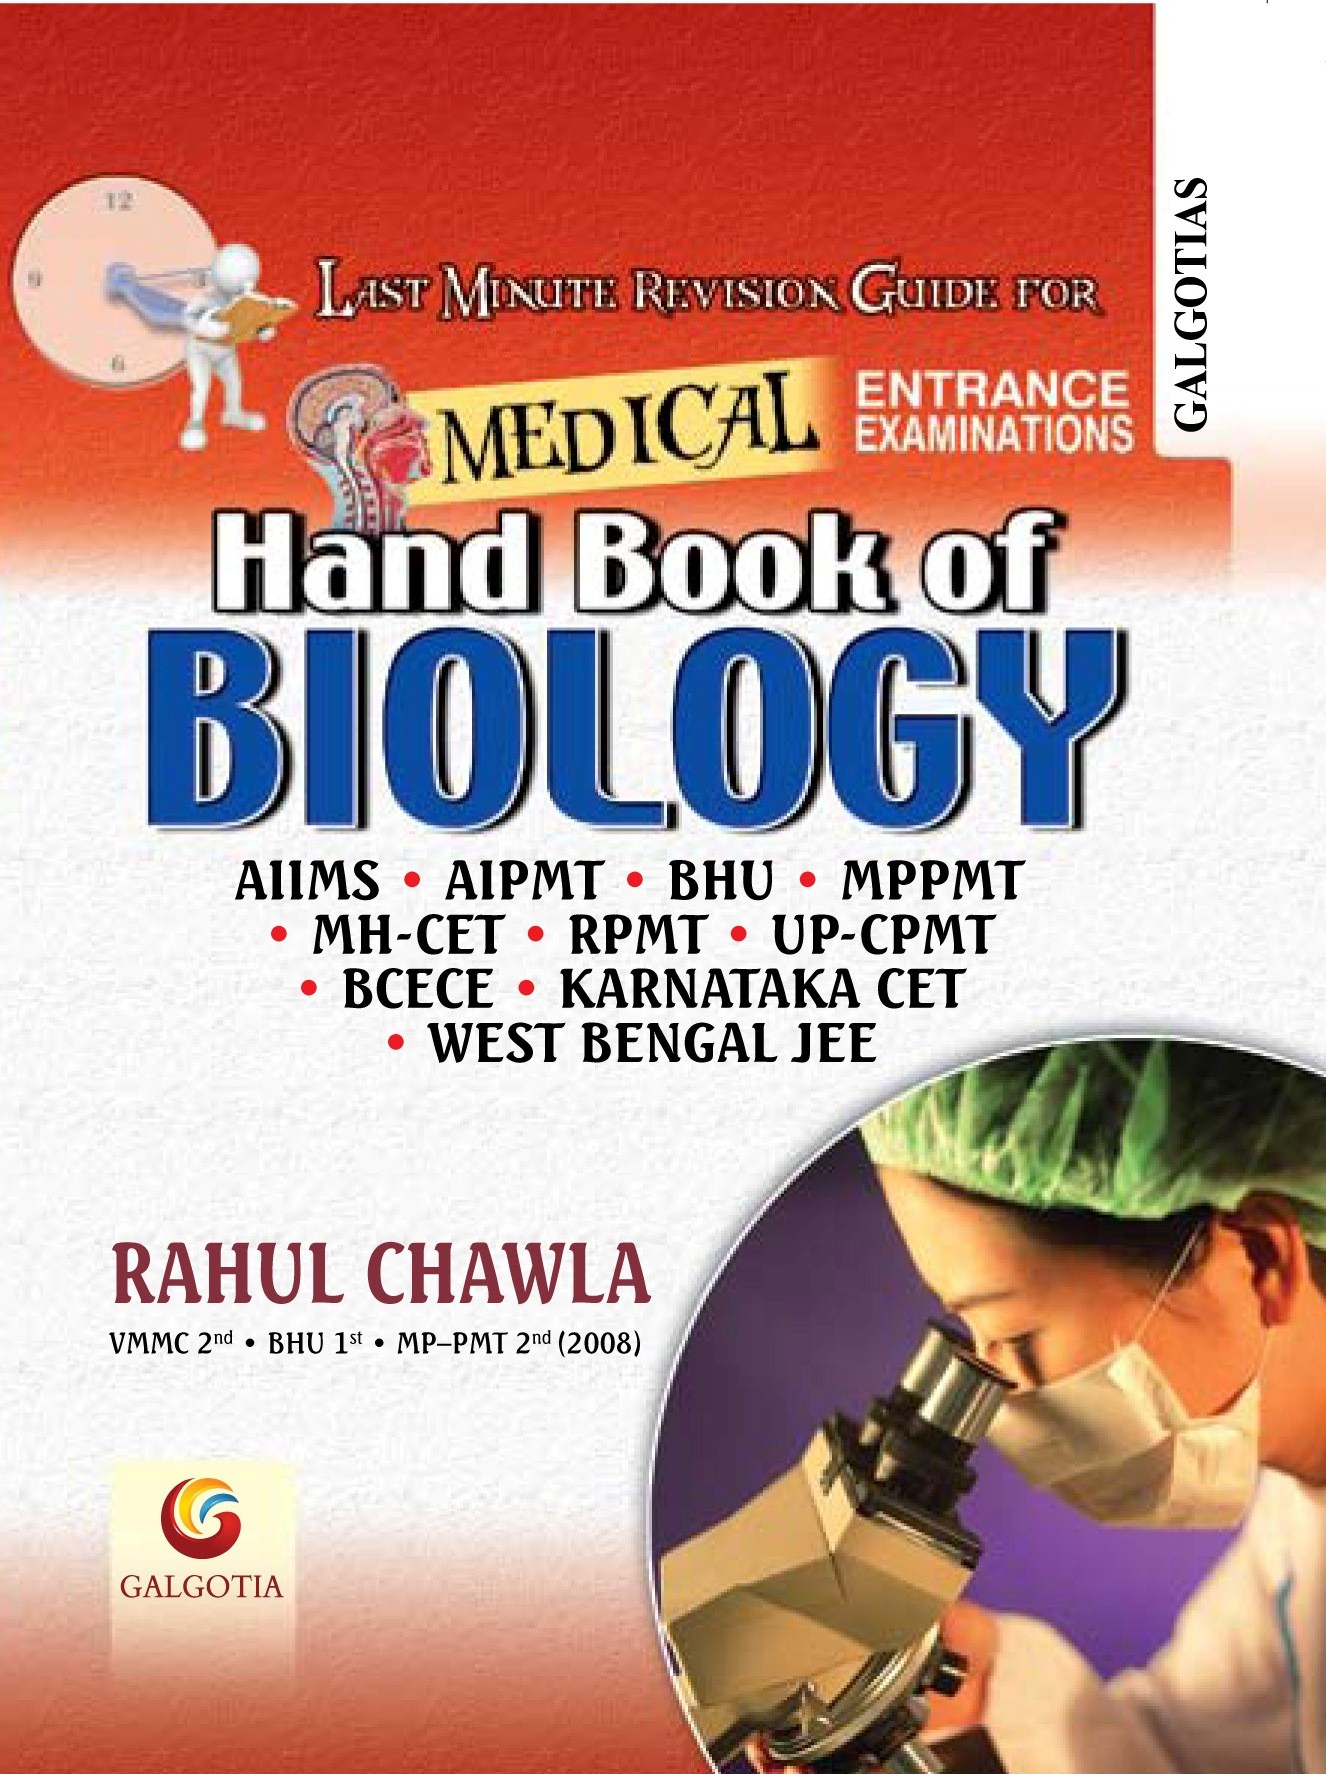 Order HANDBOOK OF BIOLOGY Online.Pay at the time of delivery